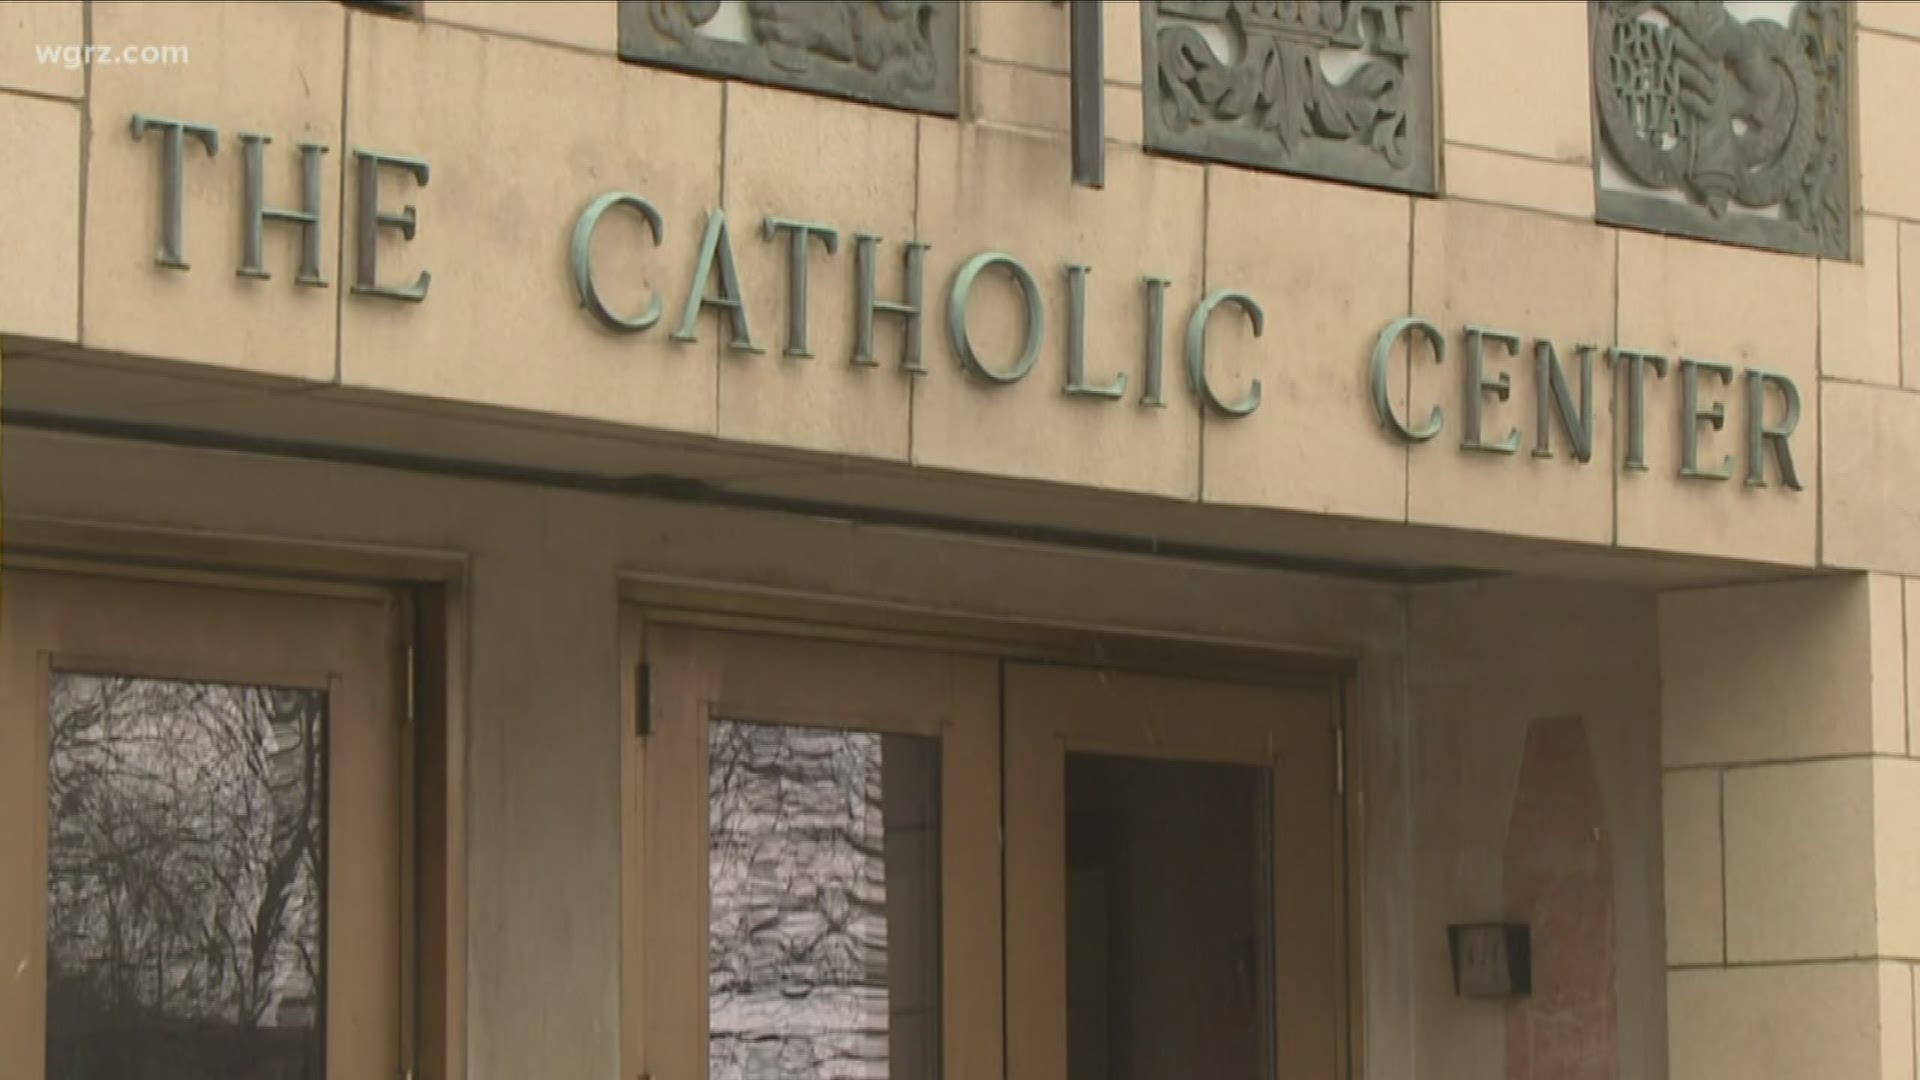 Calling for change in the local Catholic Diocese.
The Road to Recovery says there has not been much change since the resignation of Bishop Malone.